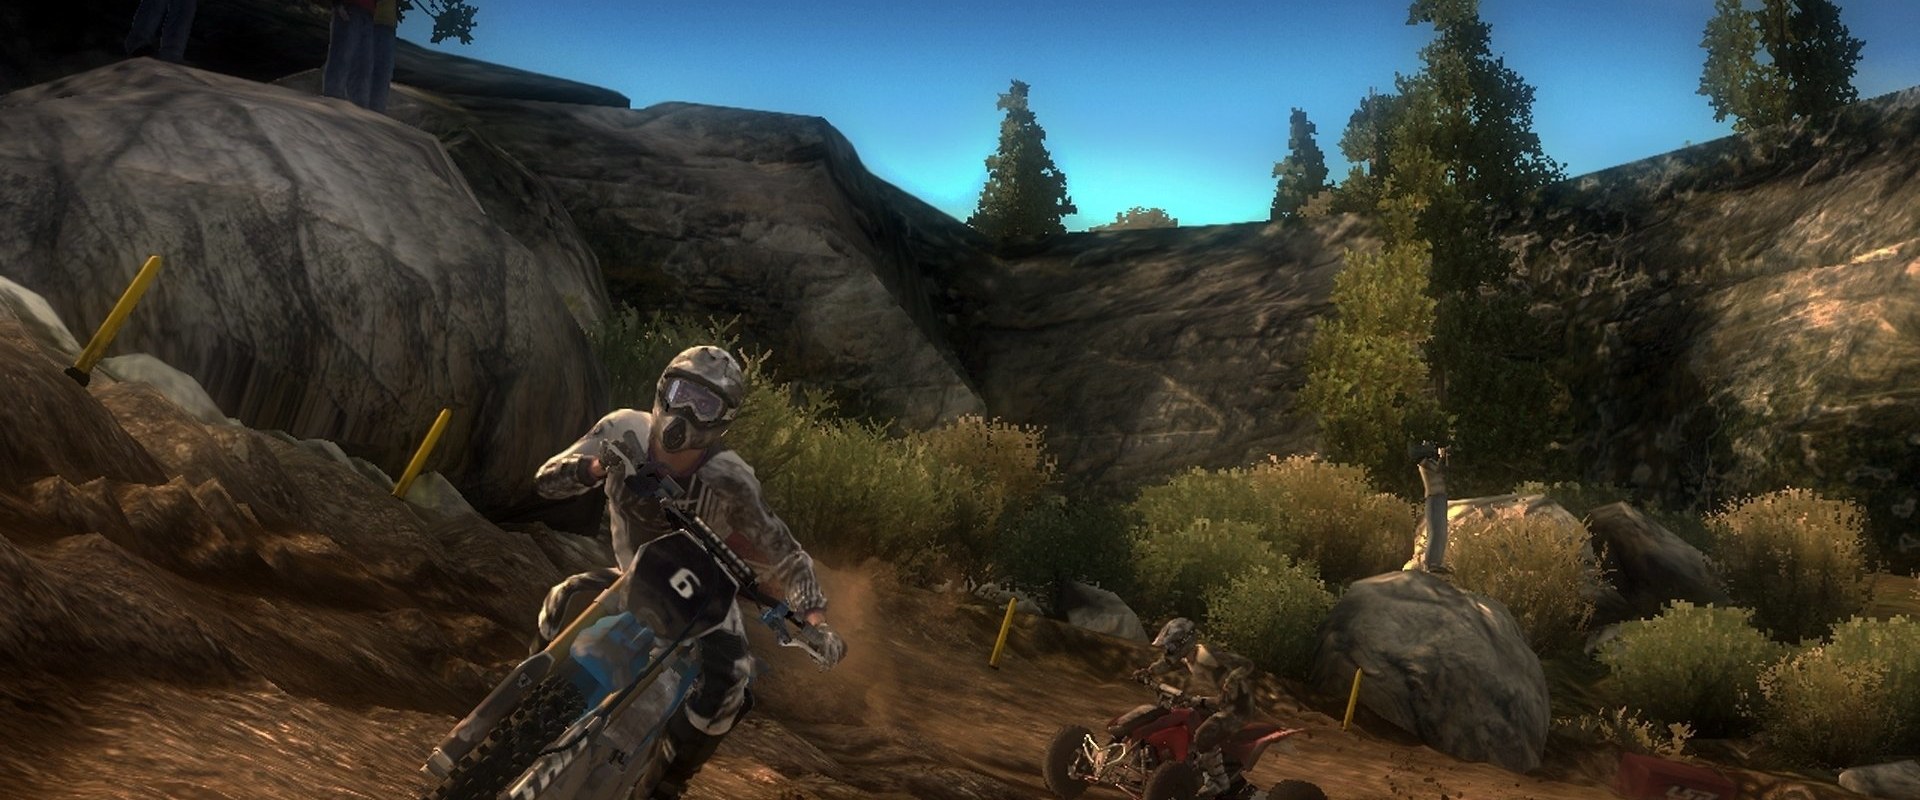 Ranking of the Top Rated Motocross Games for Other Consoles